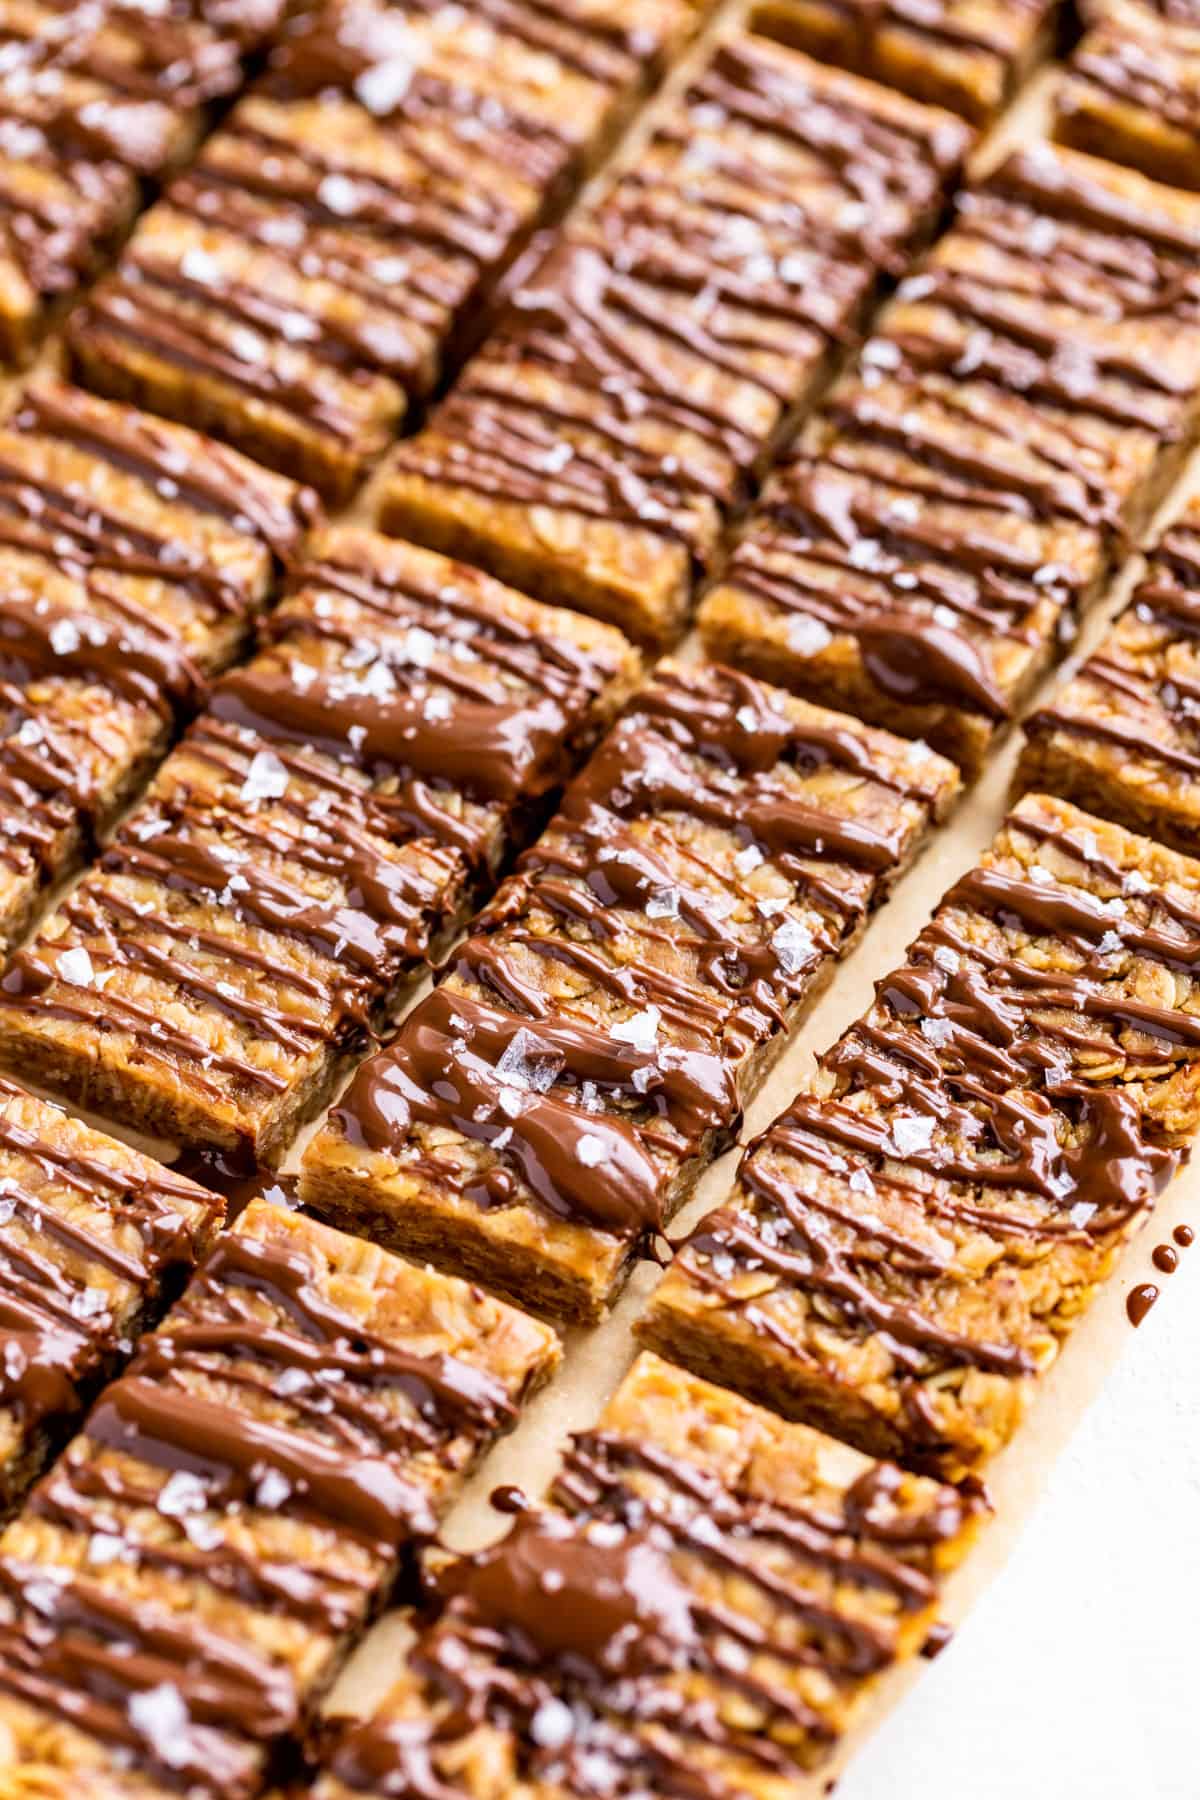 Side view of diagonal rows of Peanut Butter Granola Bars drizzled with chocolate.